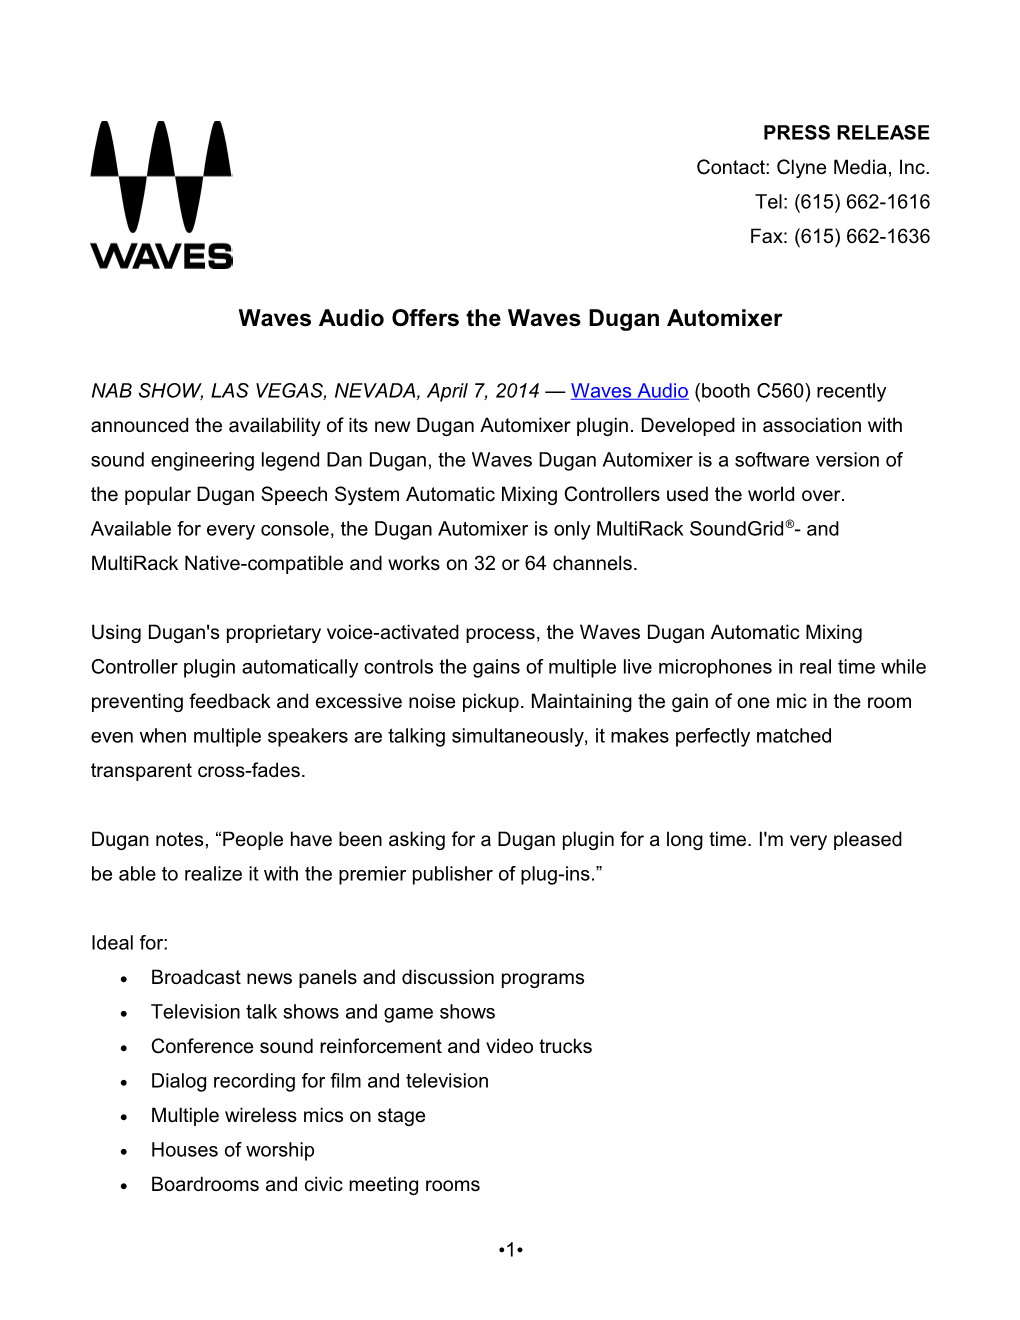 Waves Audio Offers the Waves Dugan Automixer